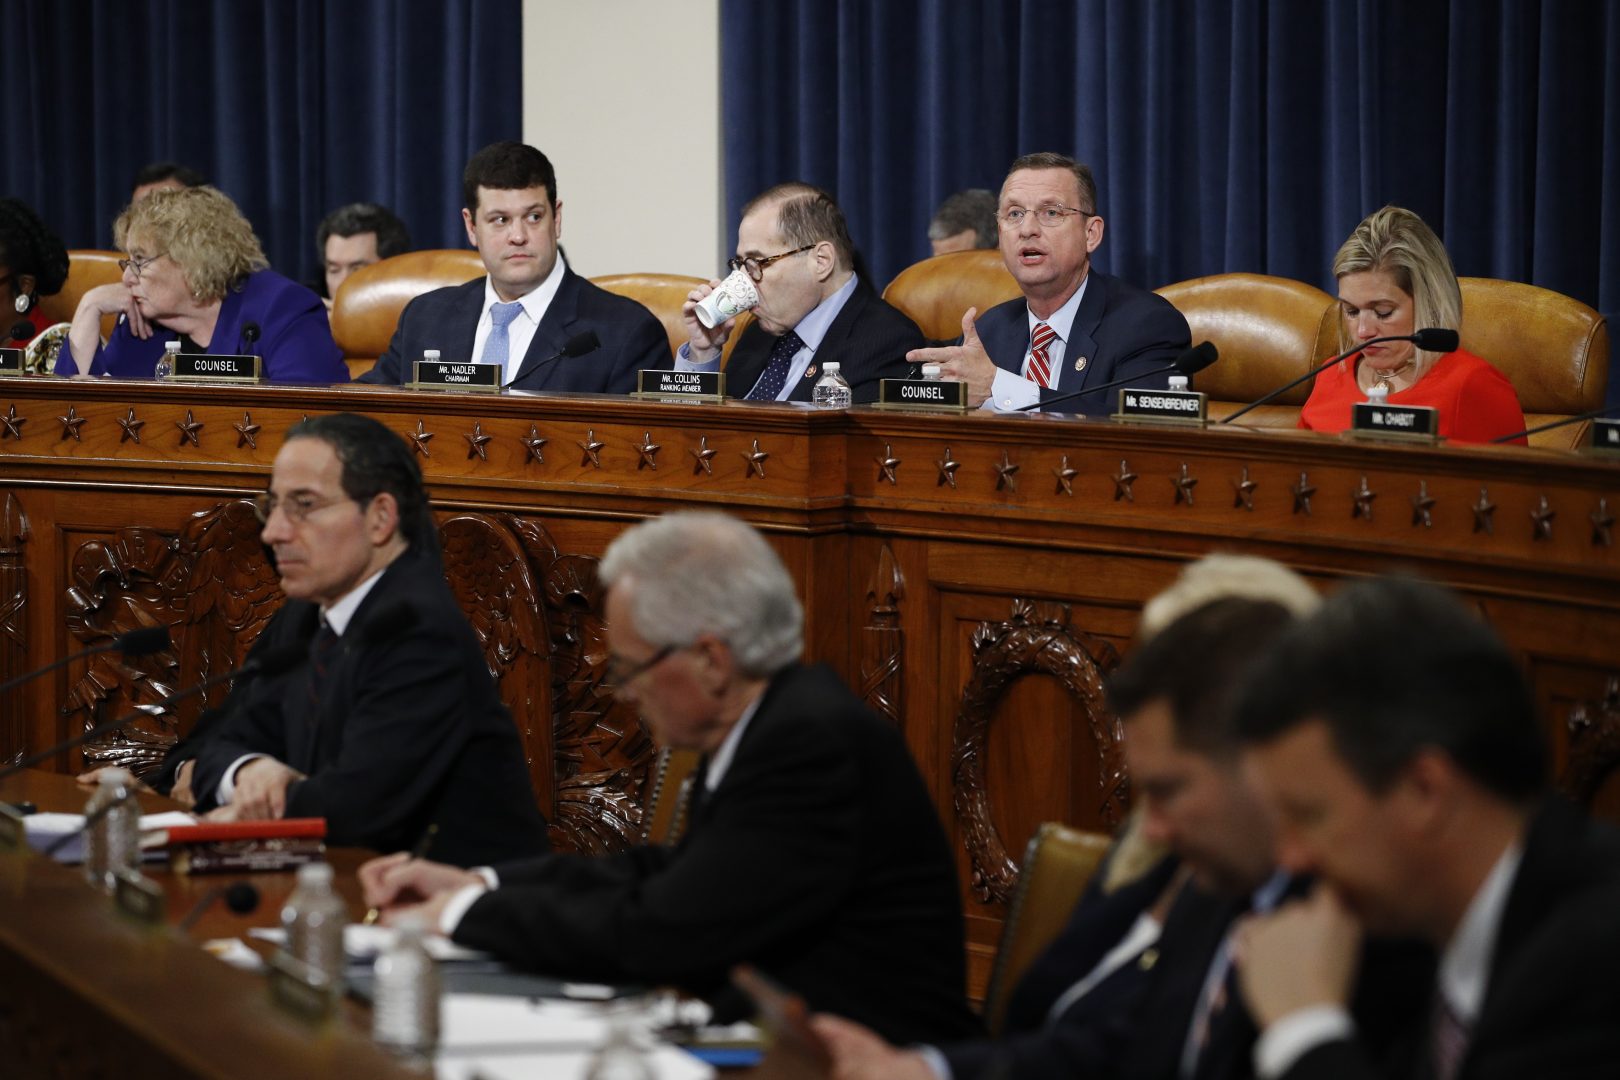 House Judiciary Committee ranking member Rep. Doug Collins, R-Ga., right, gives his opening statement during a House Judiciary Committee markup of the articles of impeachment against President Donald Trump, Wednesday, Dec. 11, 2019, on Capitol Hill in Washington. House Judiciary Committee Chairman Rep. Jerrold Nadler, D-N.Y., is left. 